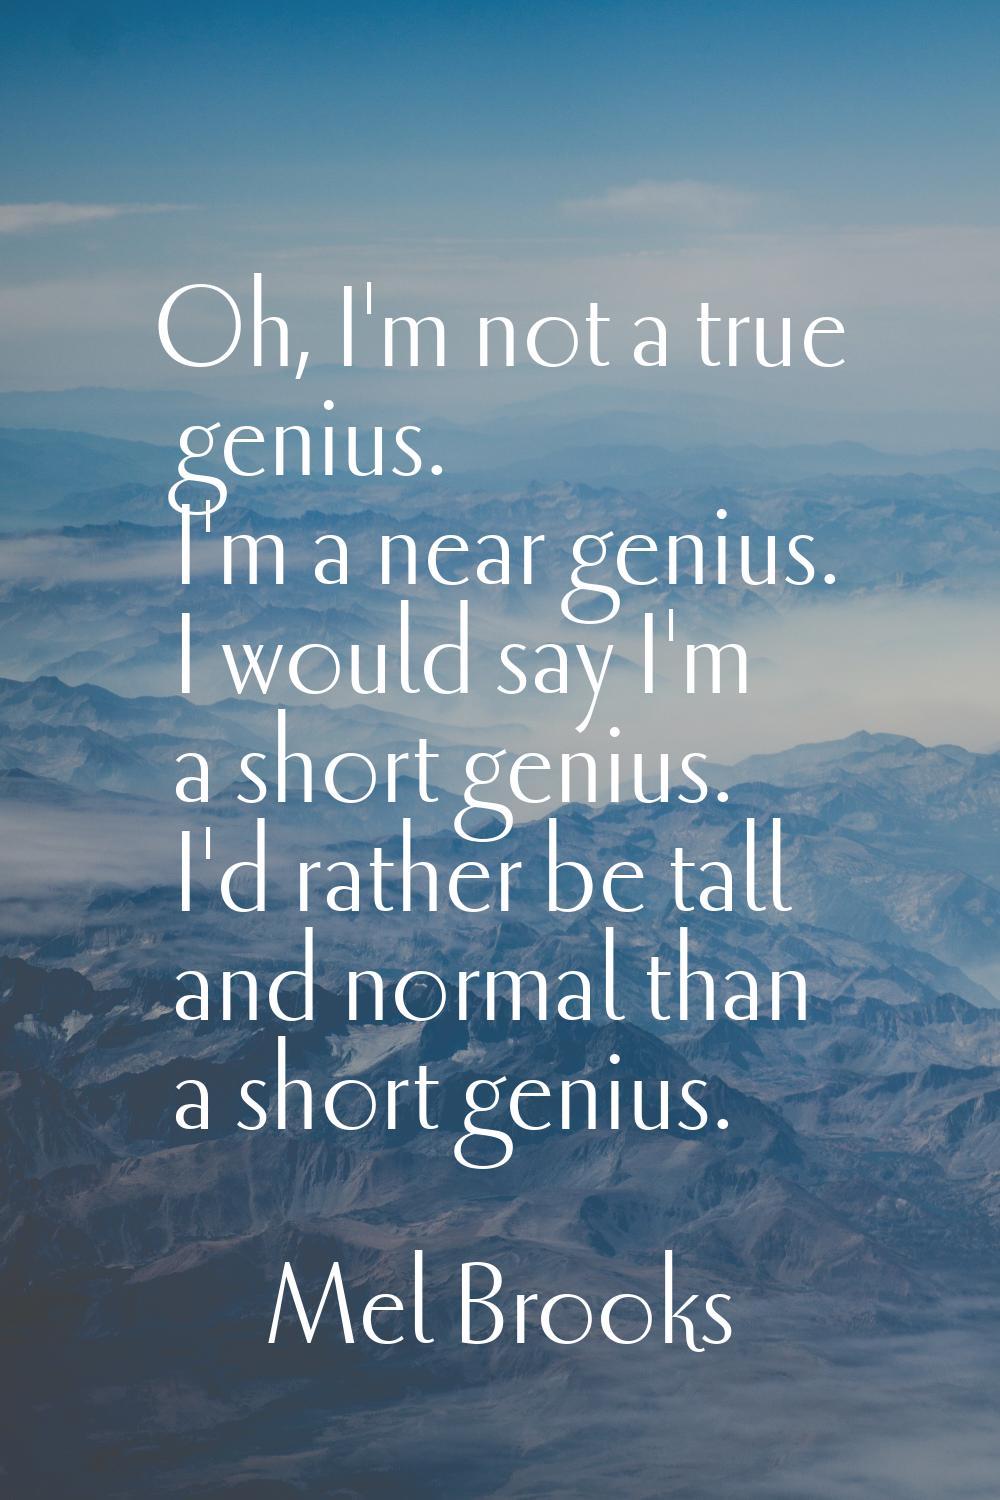 Oh, I'm not a true genius. I'm a near genius. I would say I'm a short genius. I'd rather be tall an